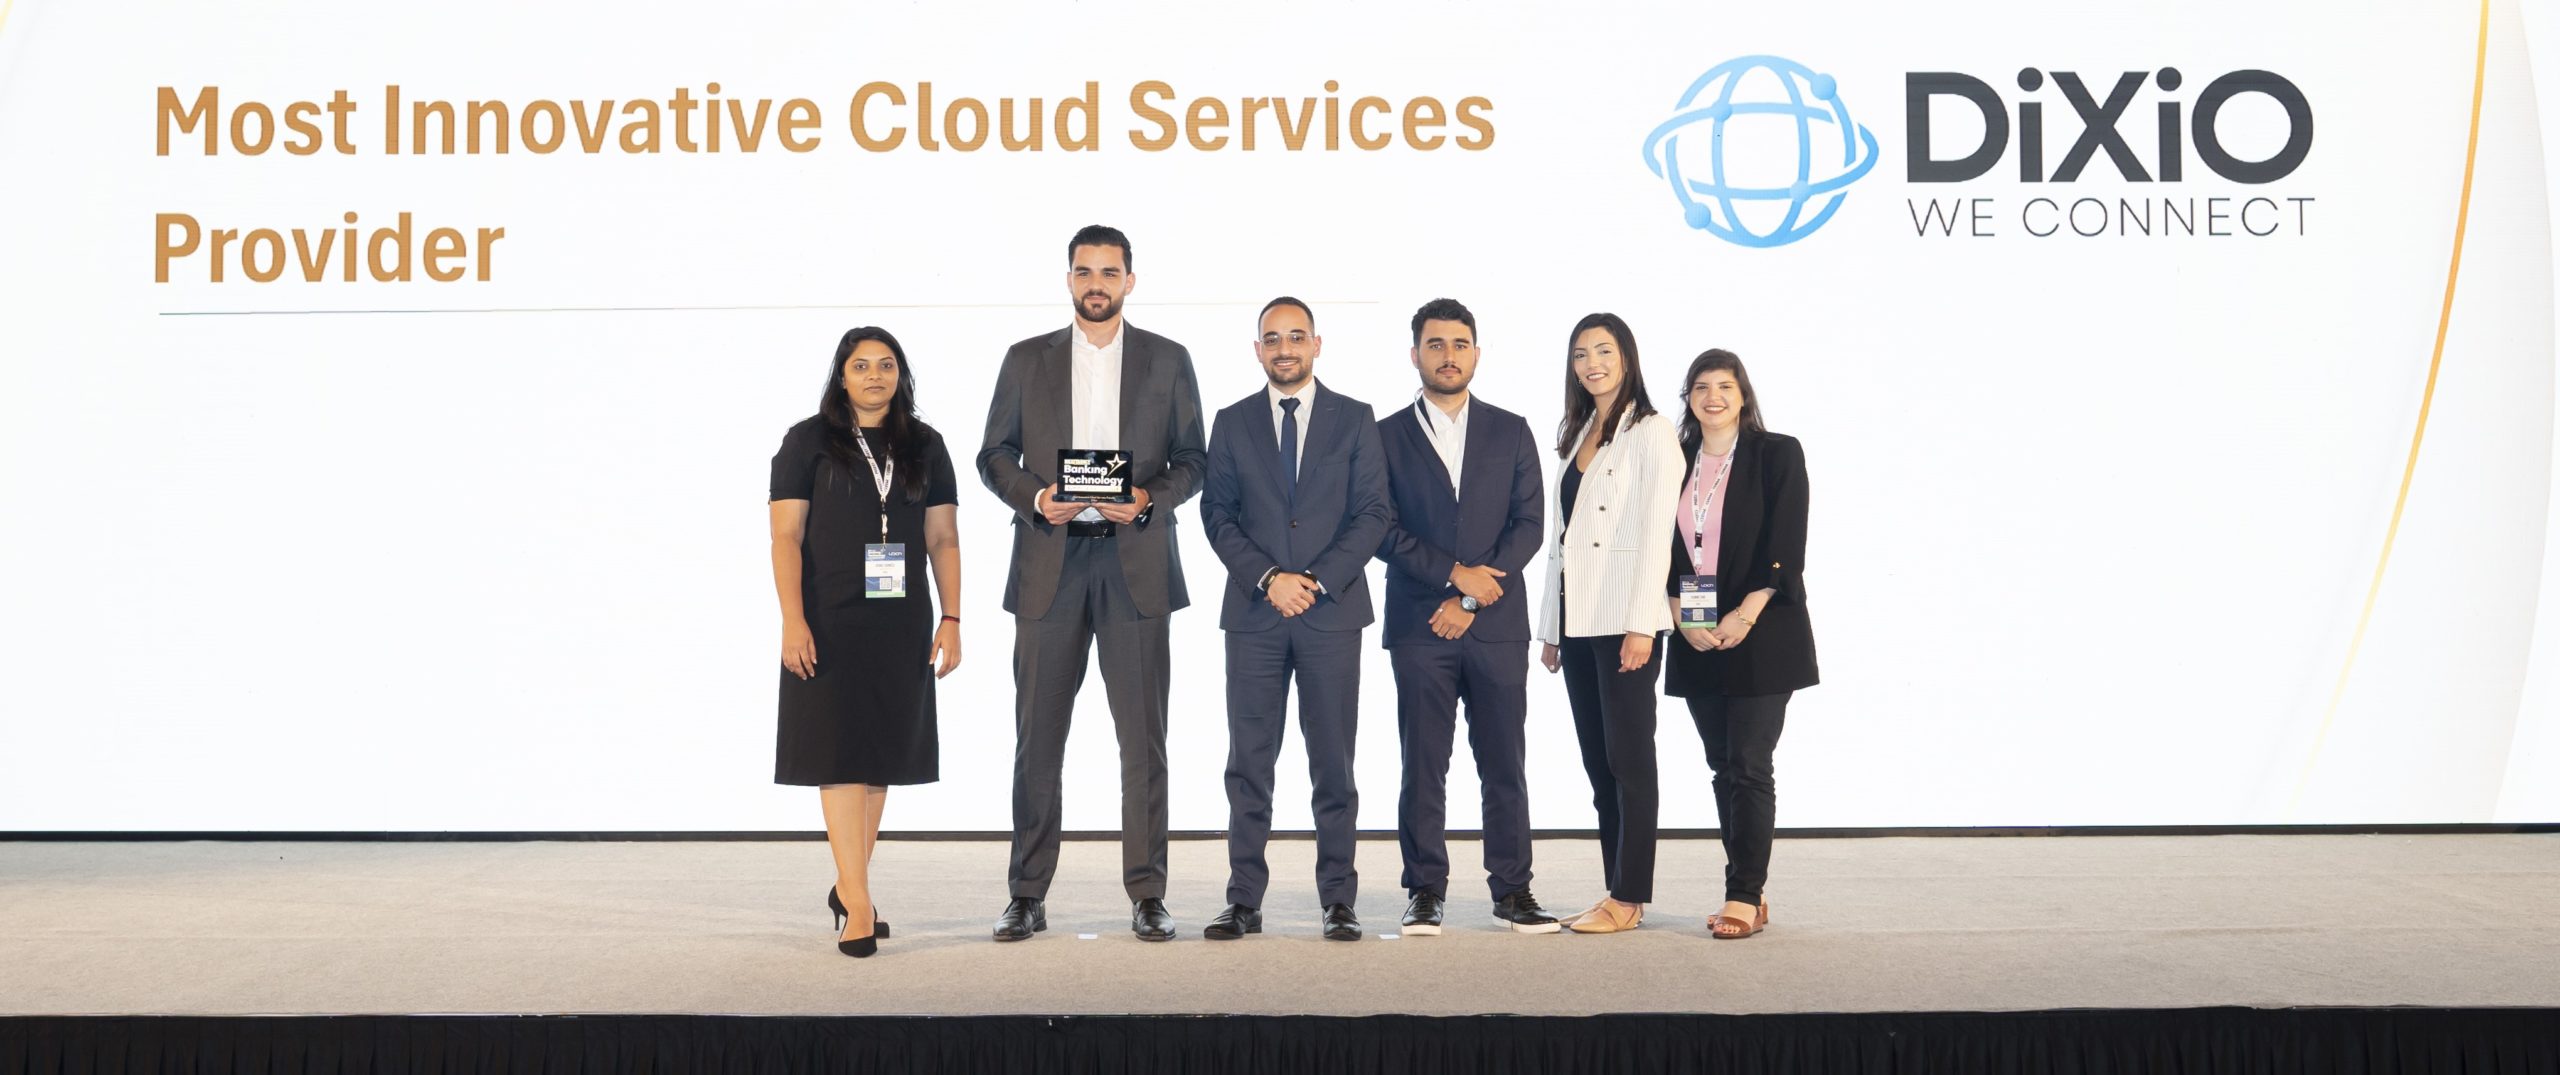 DiXiO named ‘Most Innovative Cloud Service Provider’